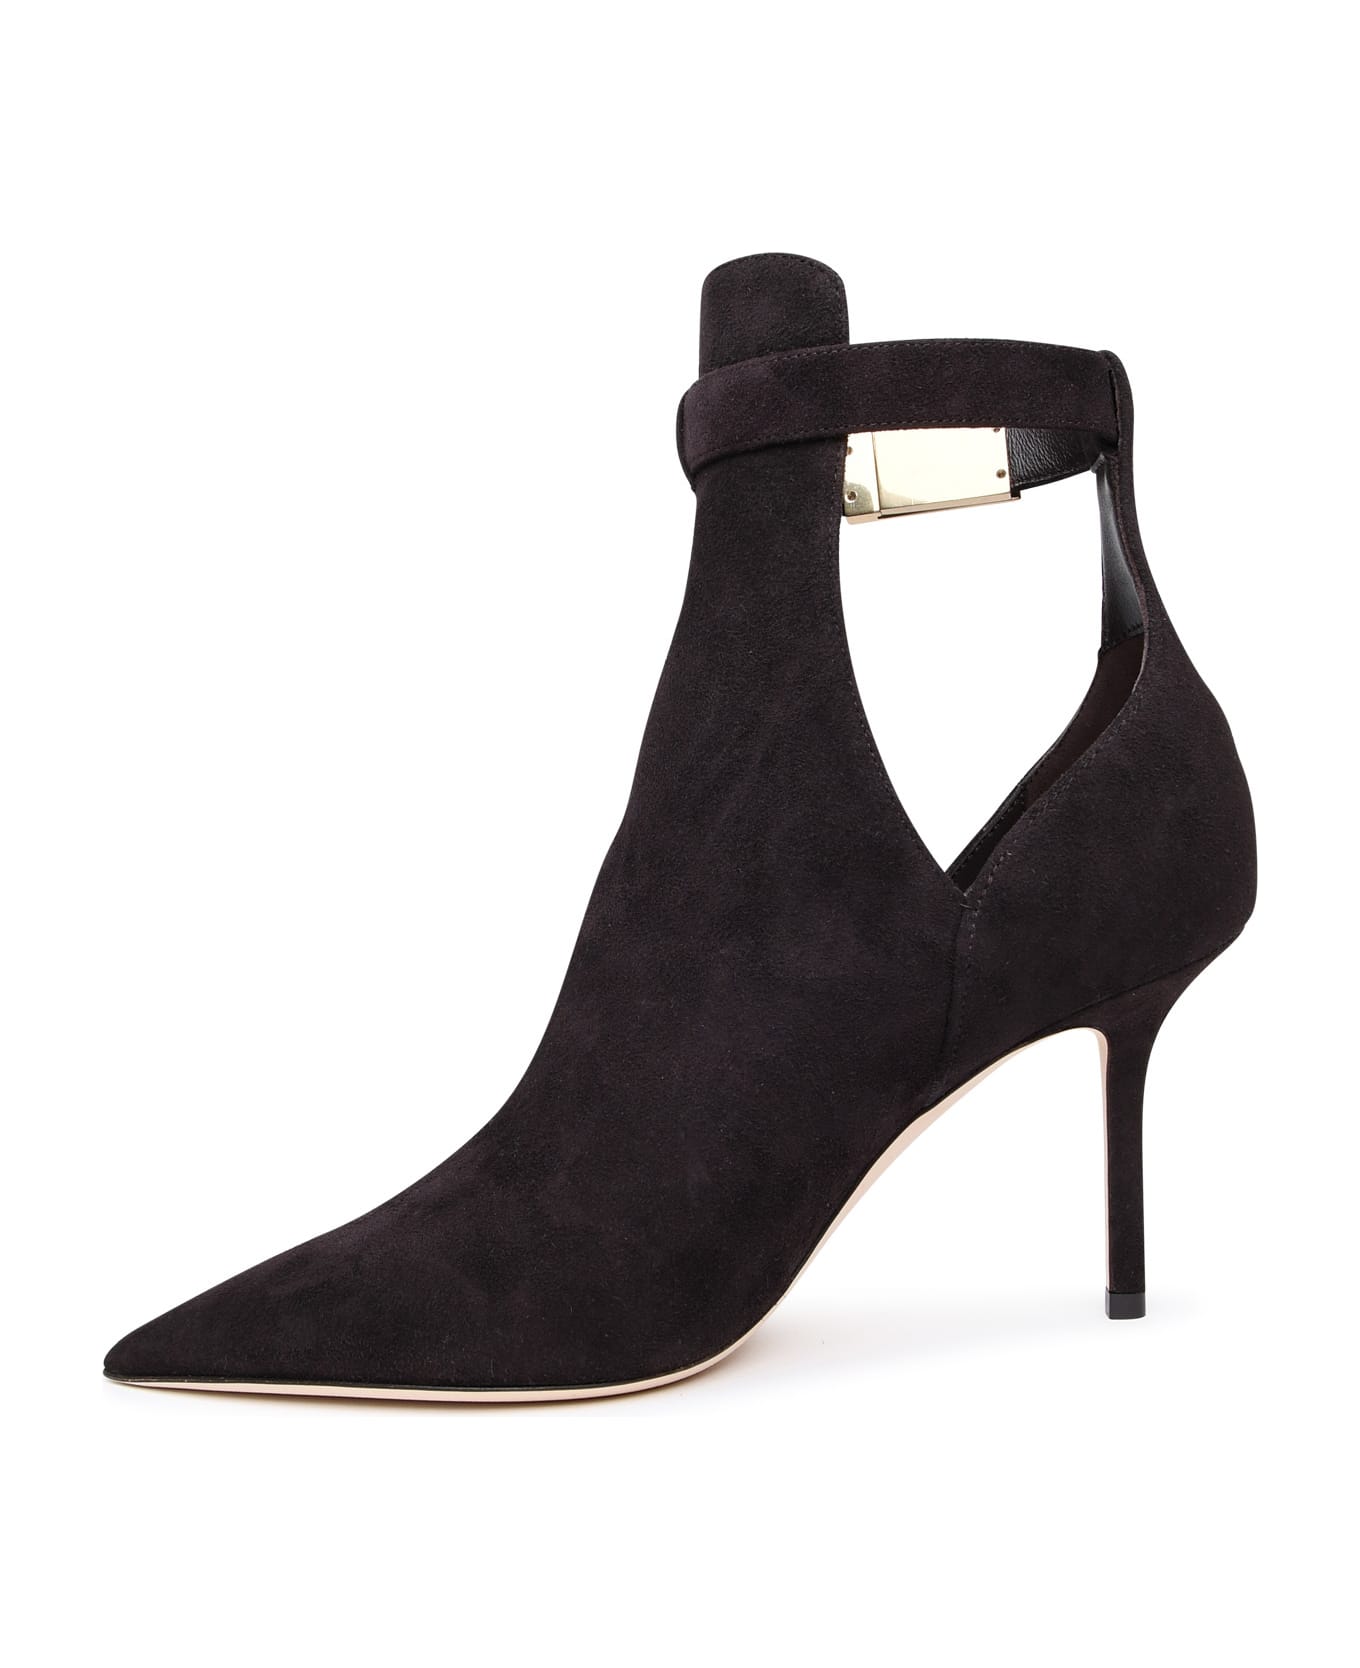 Jimmy Choo Nell Coffee Suede Ankle Boots - Brown